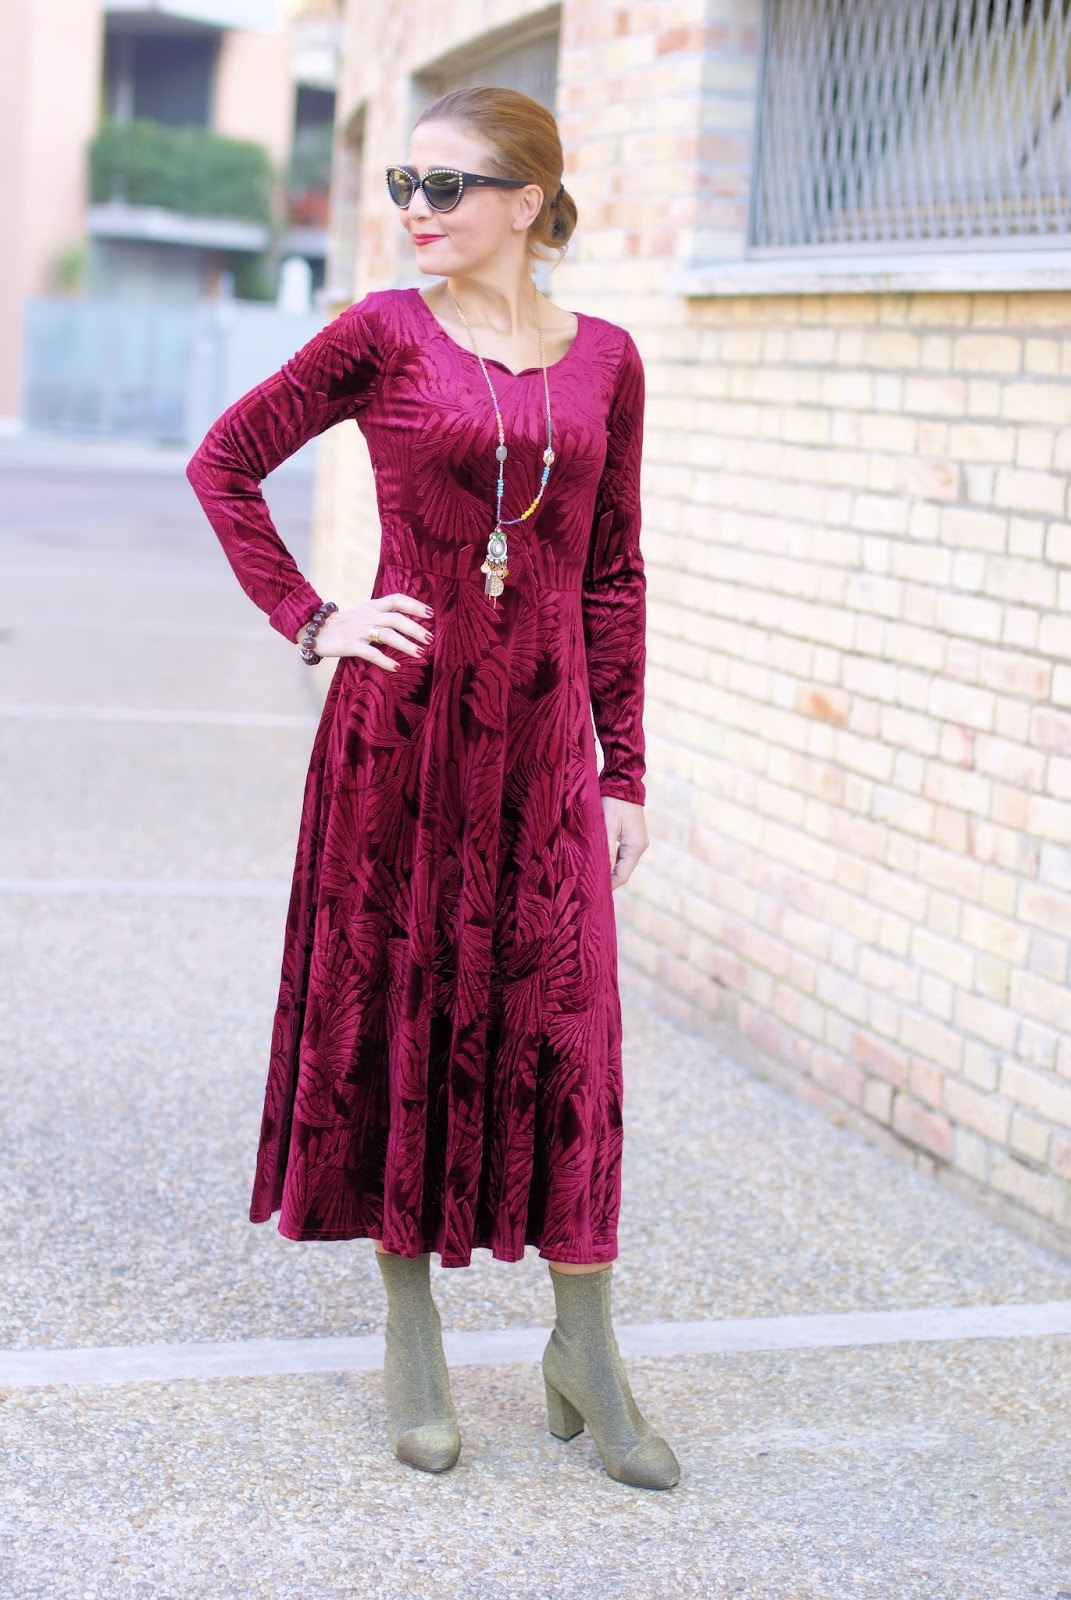 Metisu red velvet maxi dress & sock heels: 70s vibes on Fashion and Cookies fashion blog, fashion blogger style